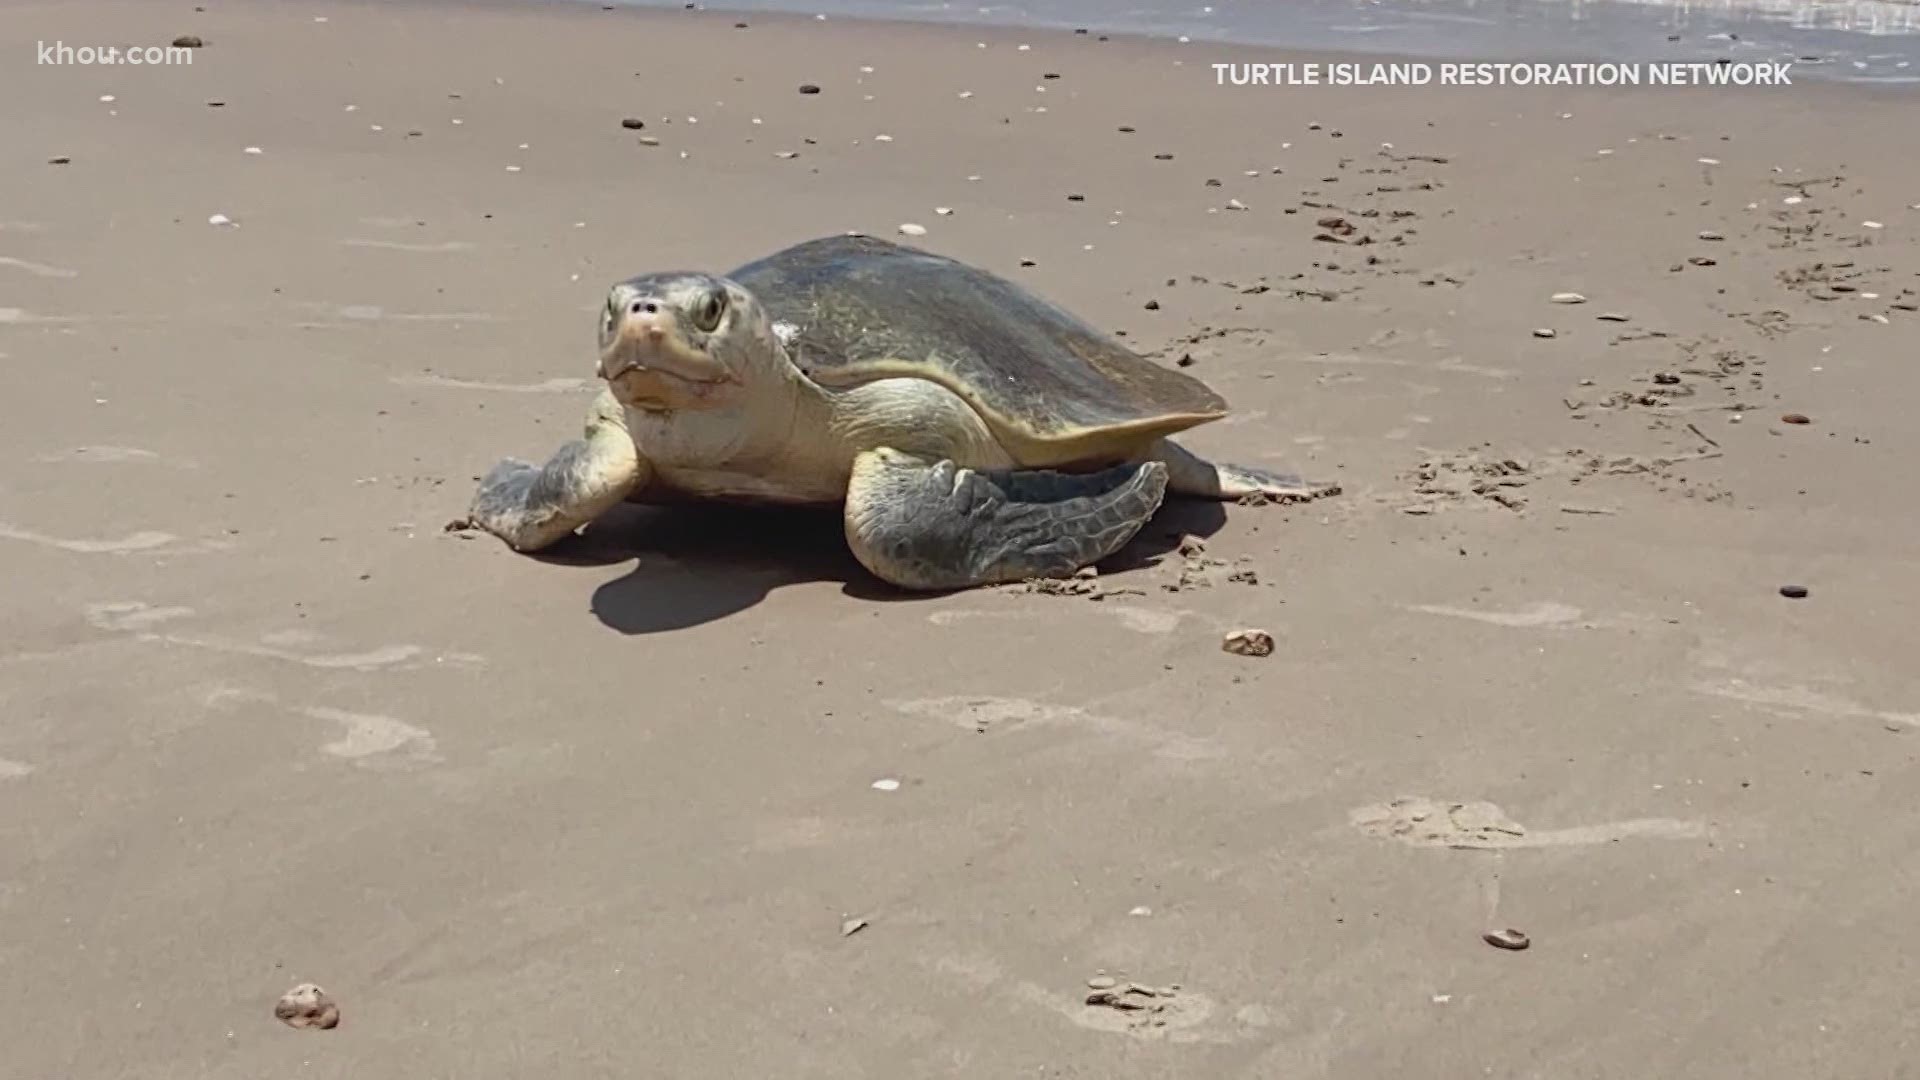 Conservationists with the Turtle Island Restoration Network want to remind beachgoers to leave these turtles alone if you happen to spot one.